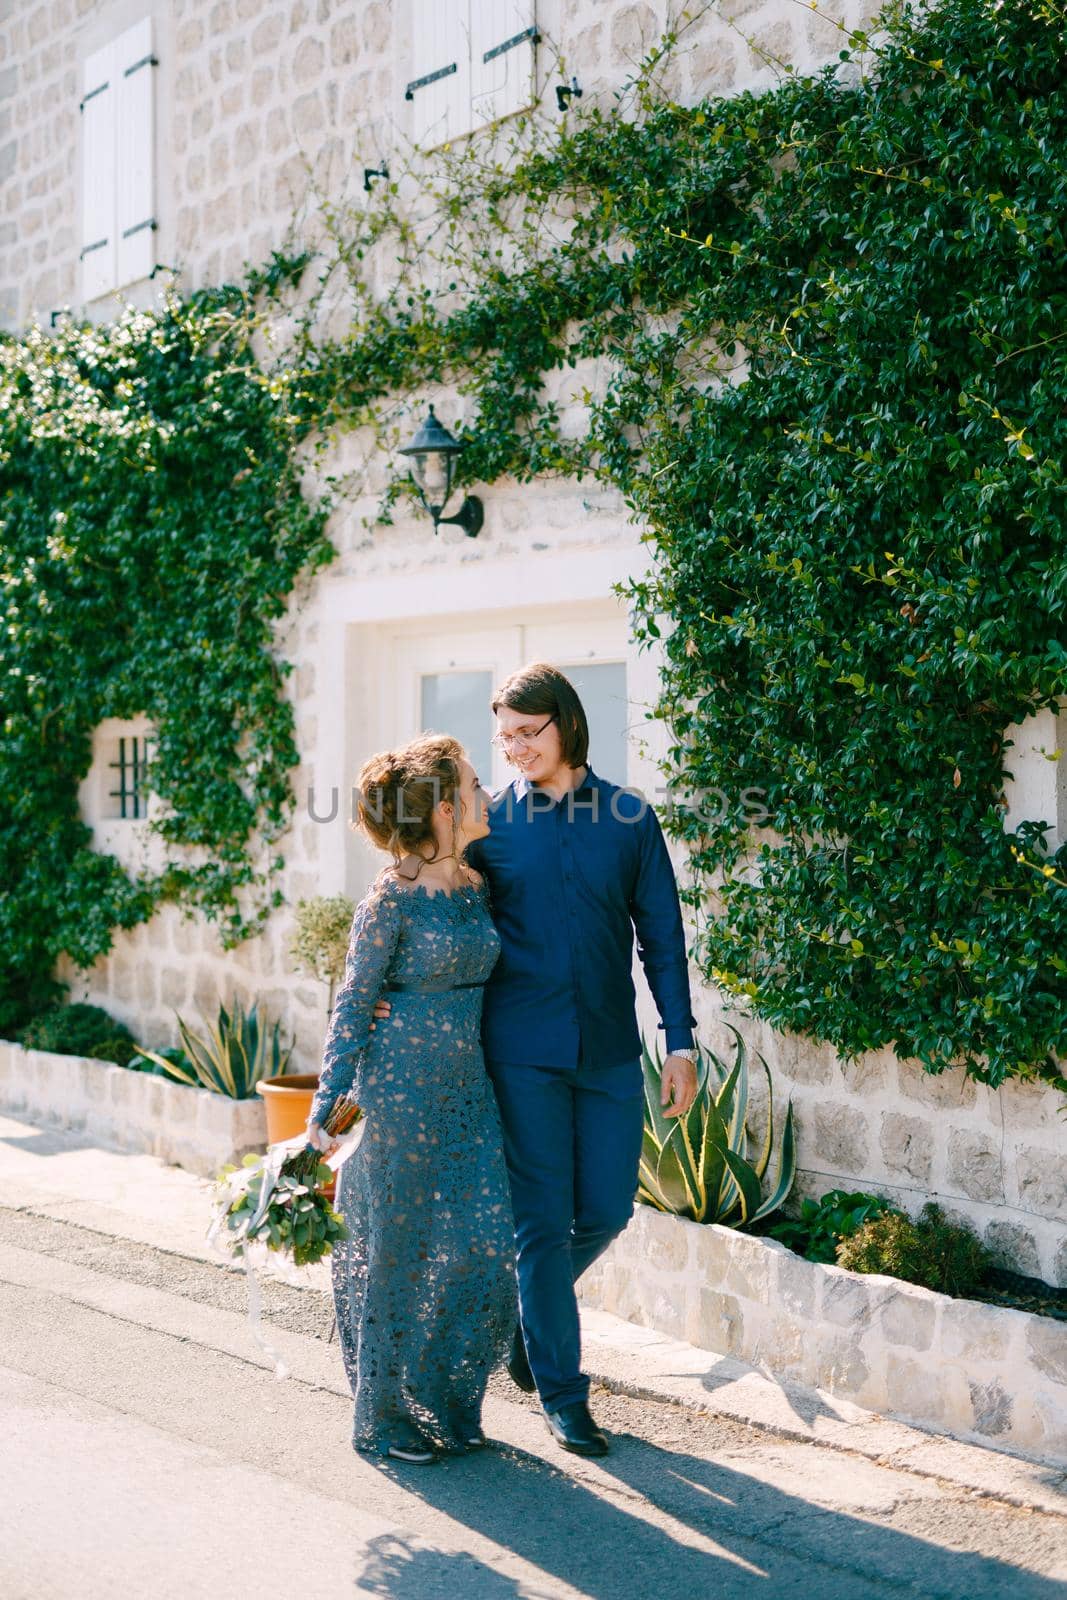 The bride and groom are embracing along the road near an old building with a white door, the wall is entwined with a green liana . High quality photo